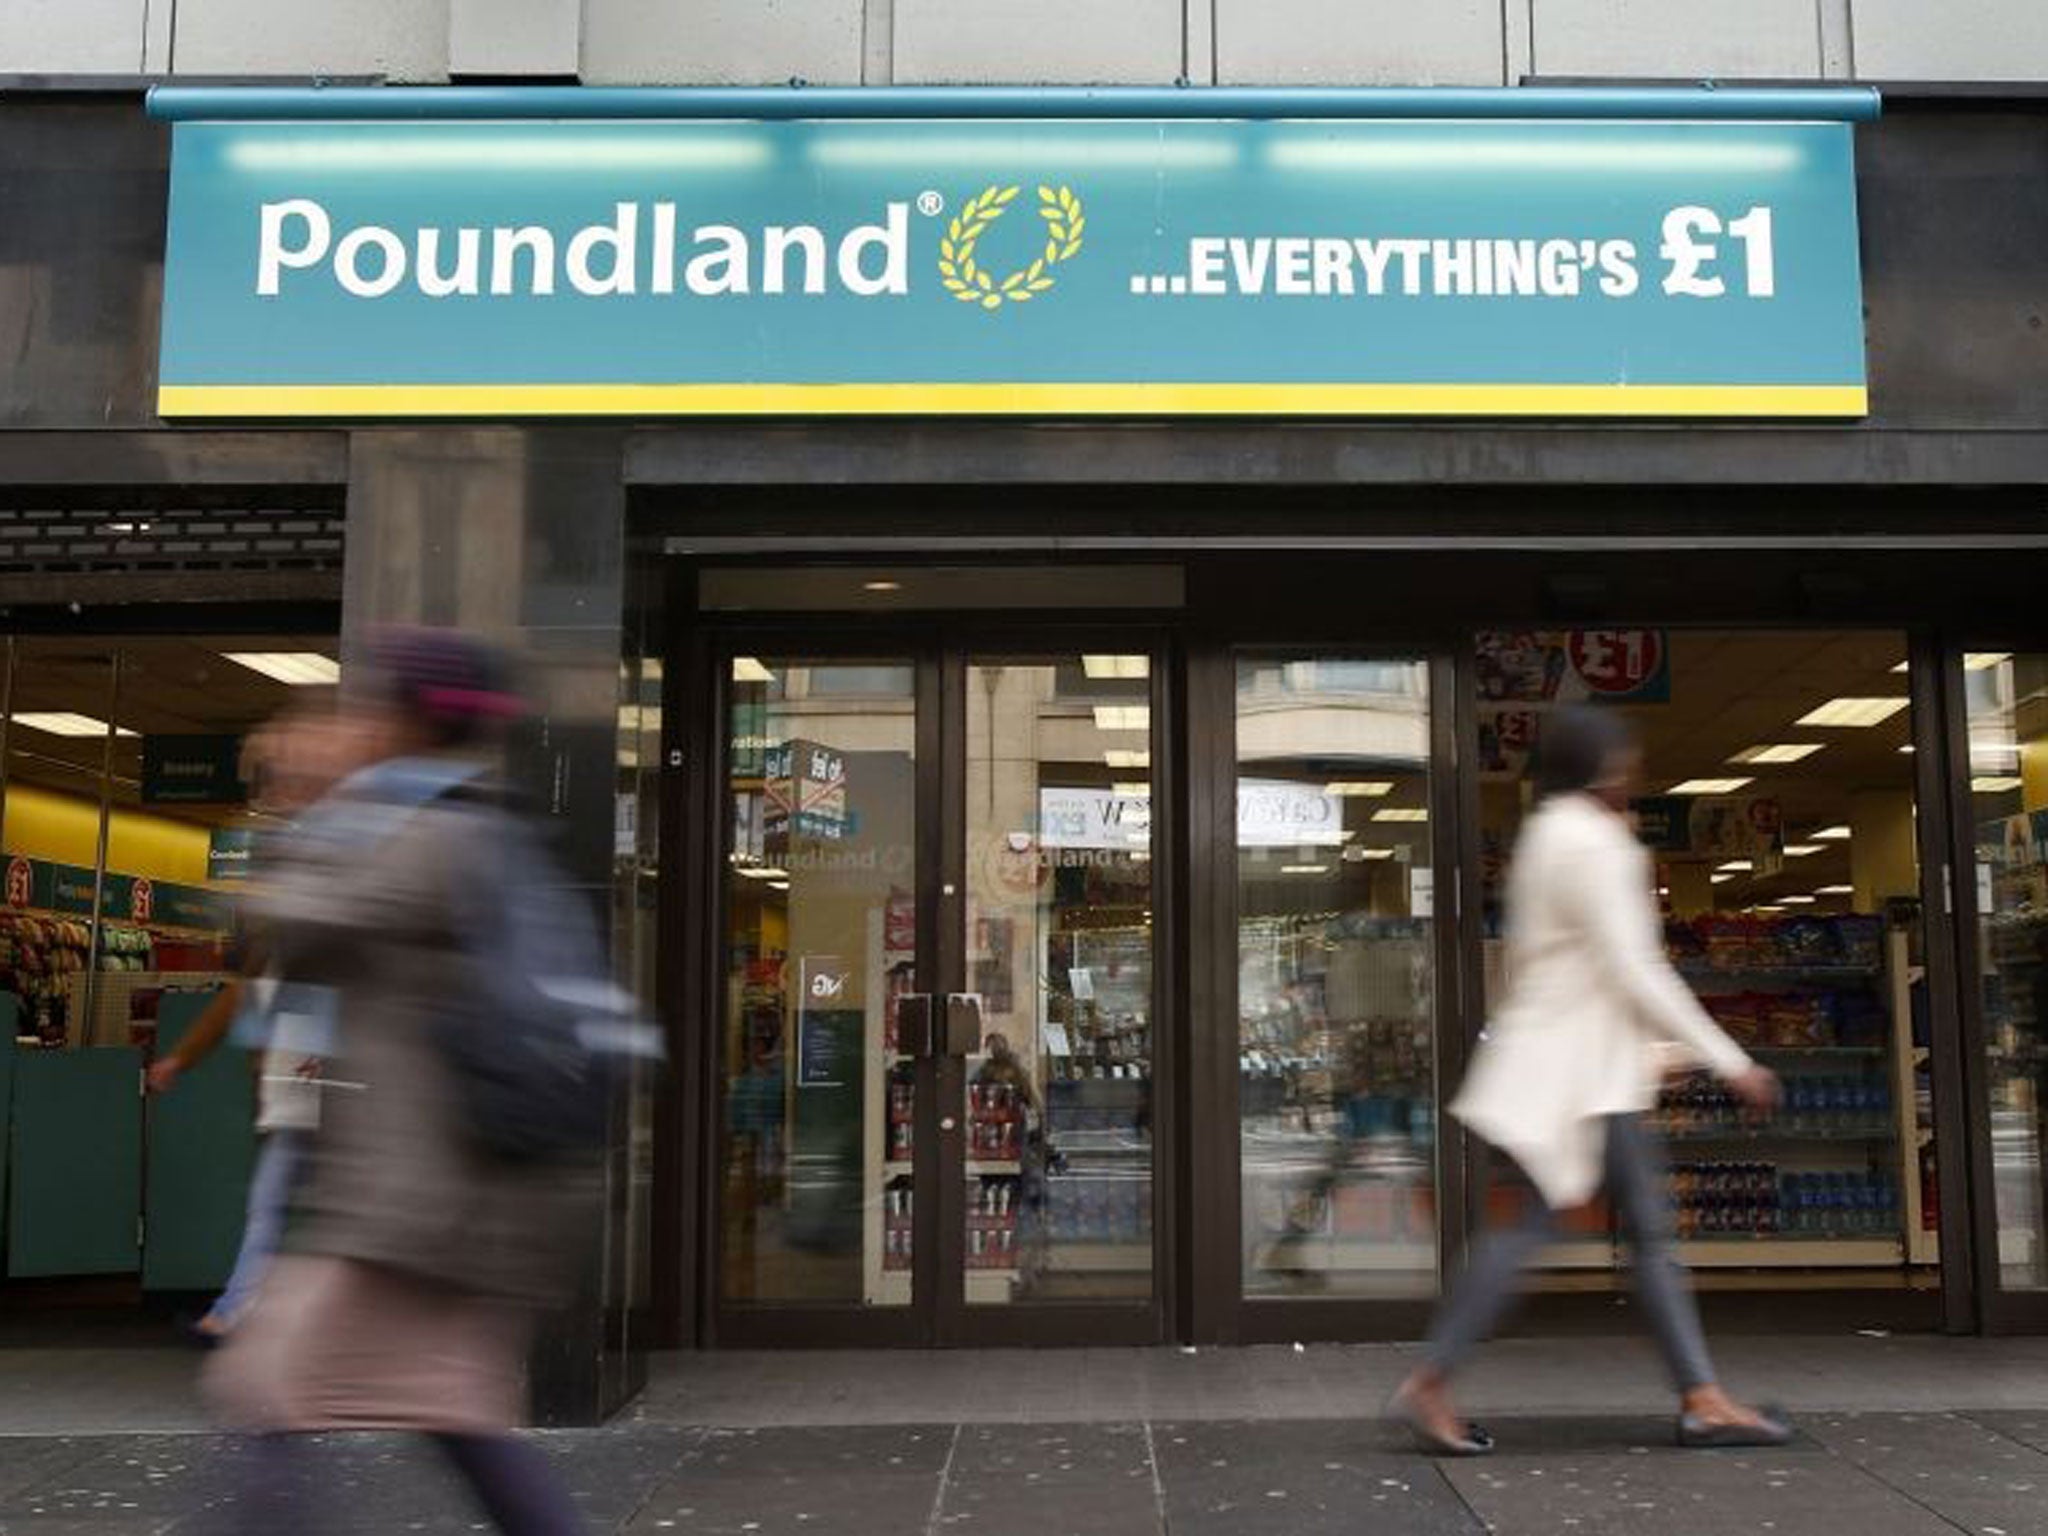 Poundland has been bought by South African group Steinhoff